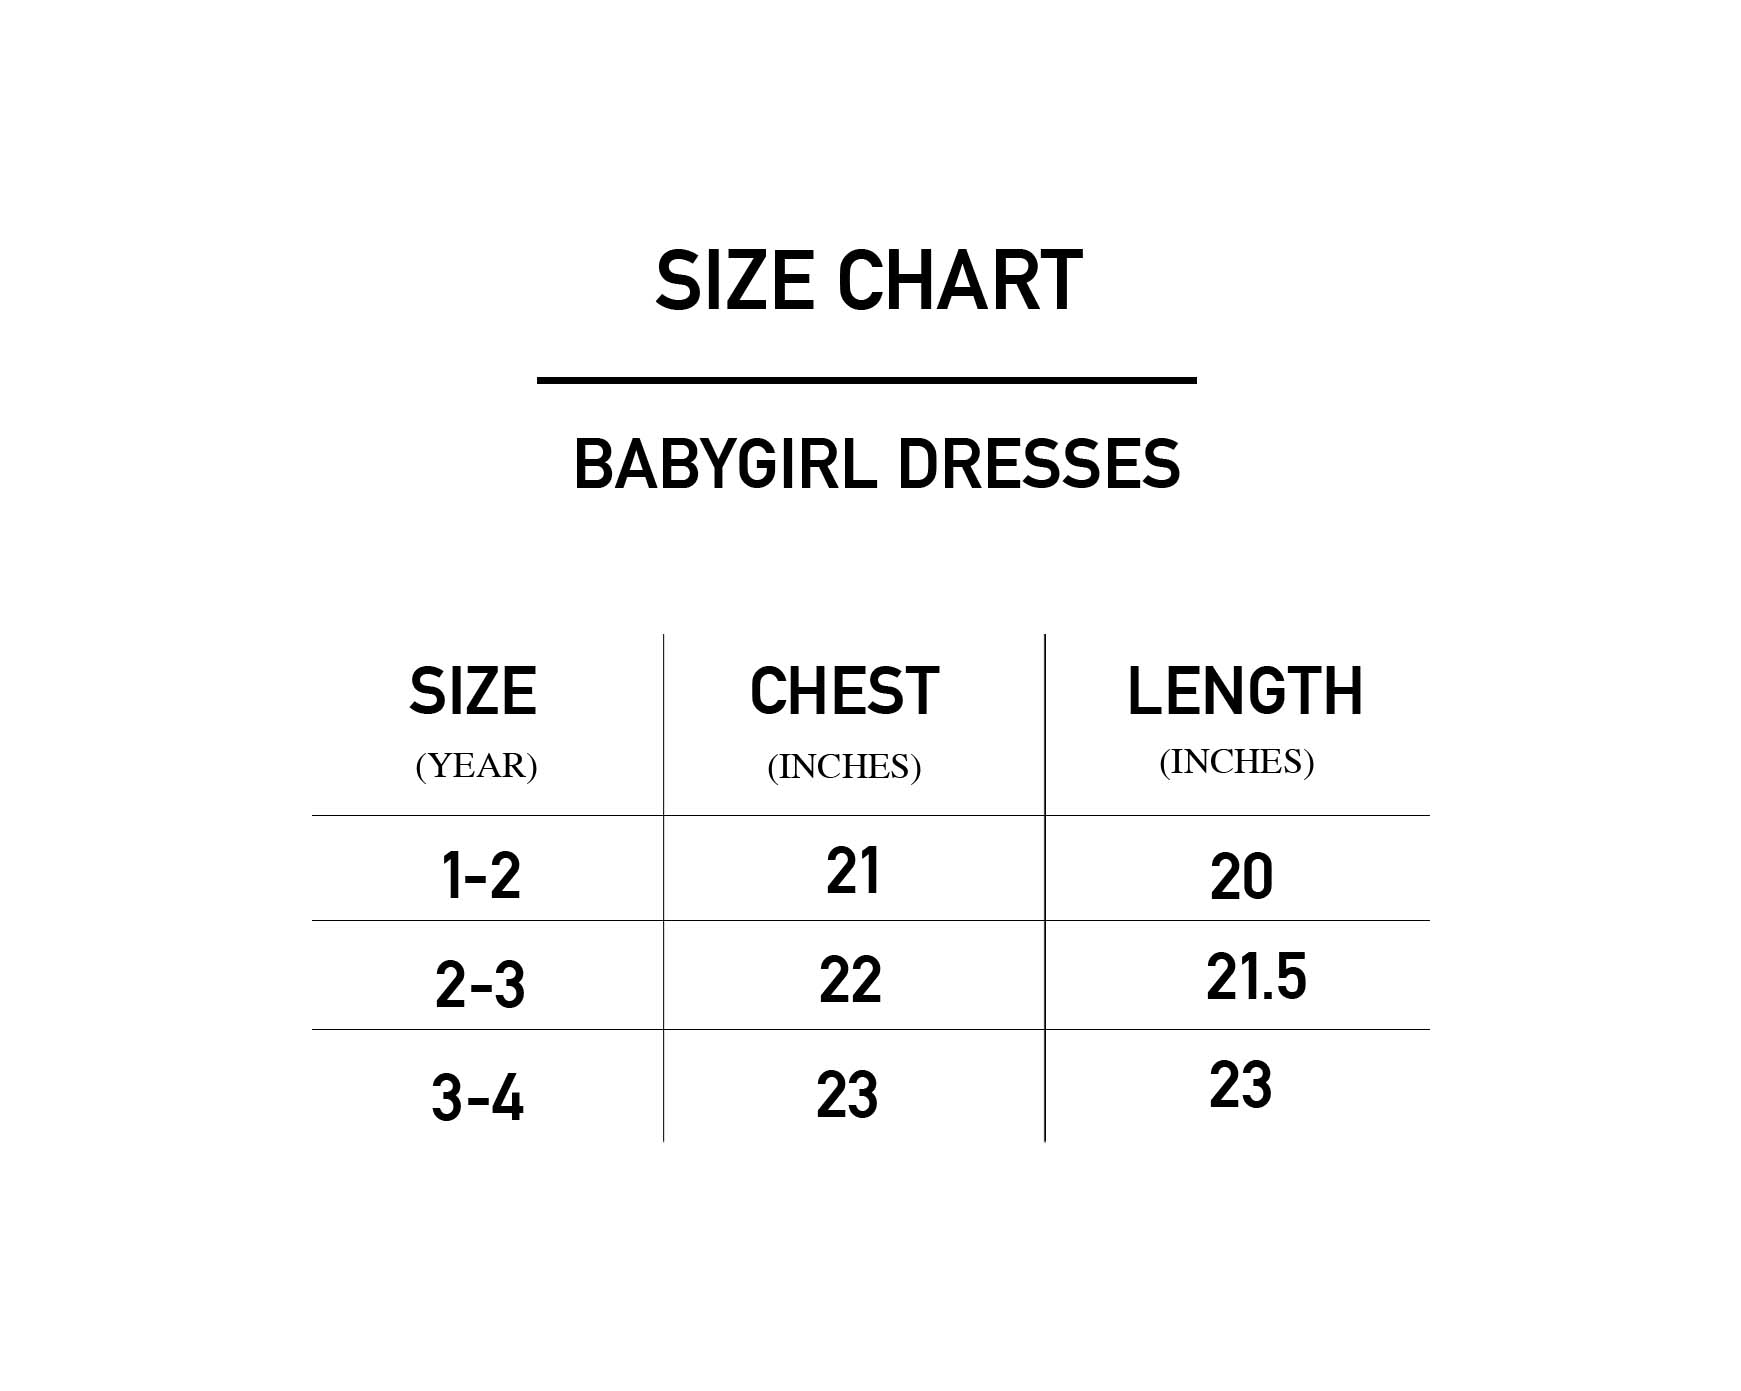 Baby dresses for baby girls